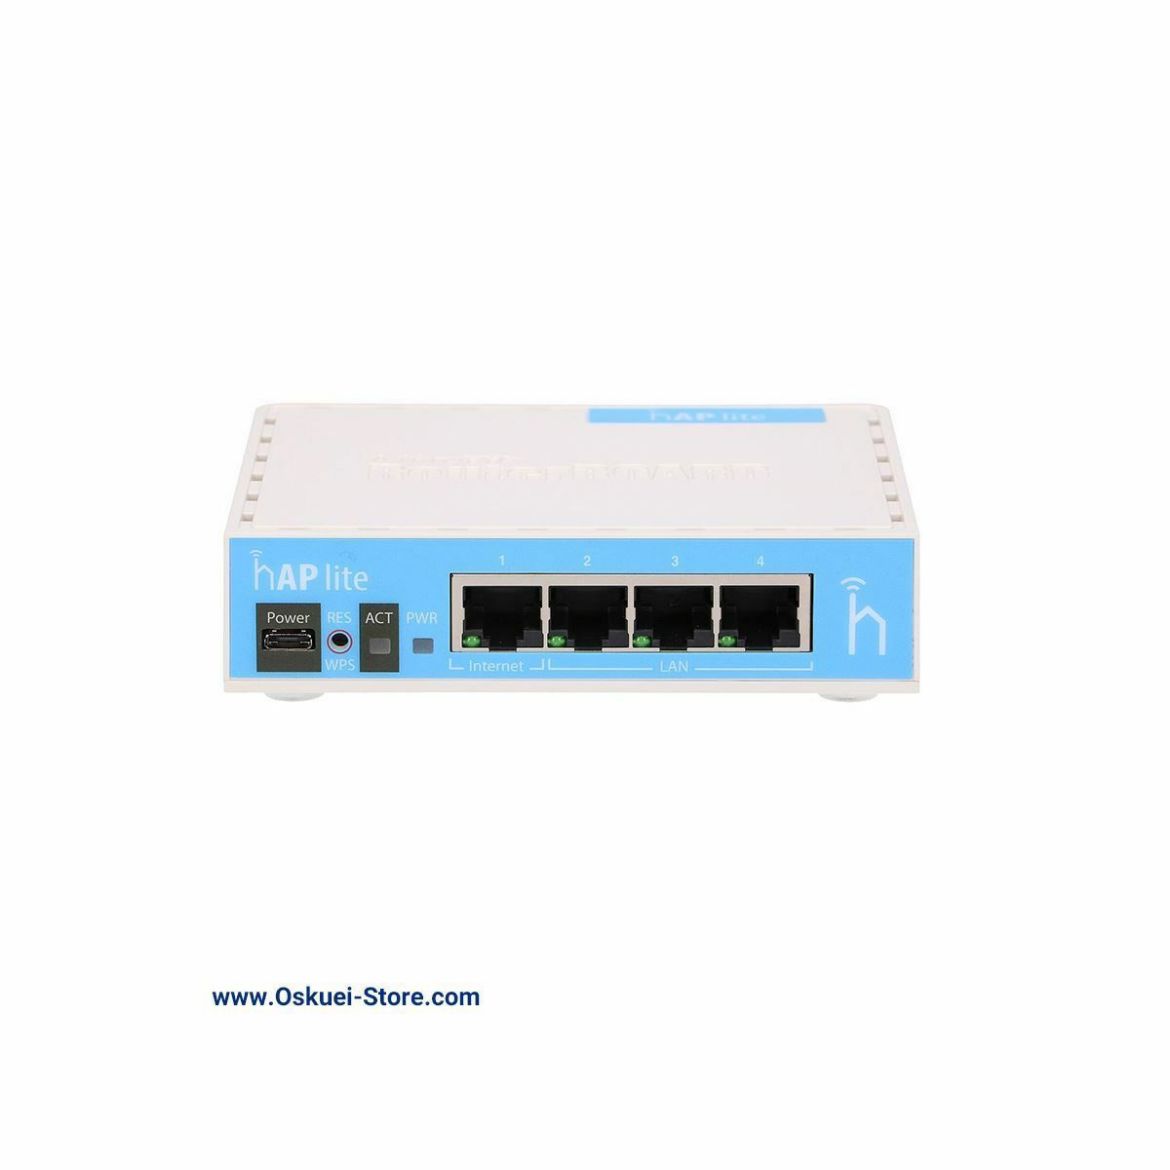 MikroTik RB941-2nD Router Front